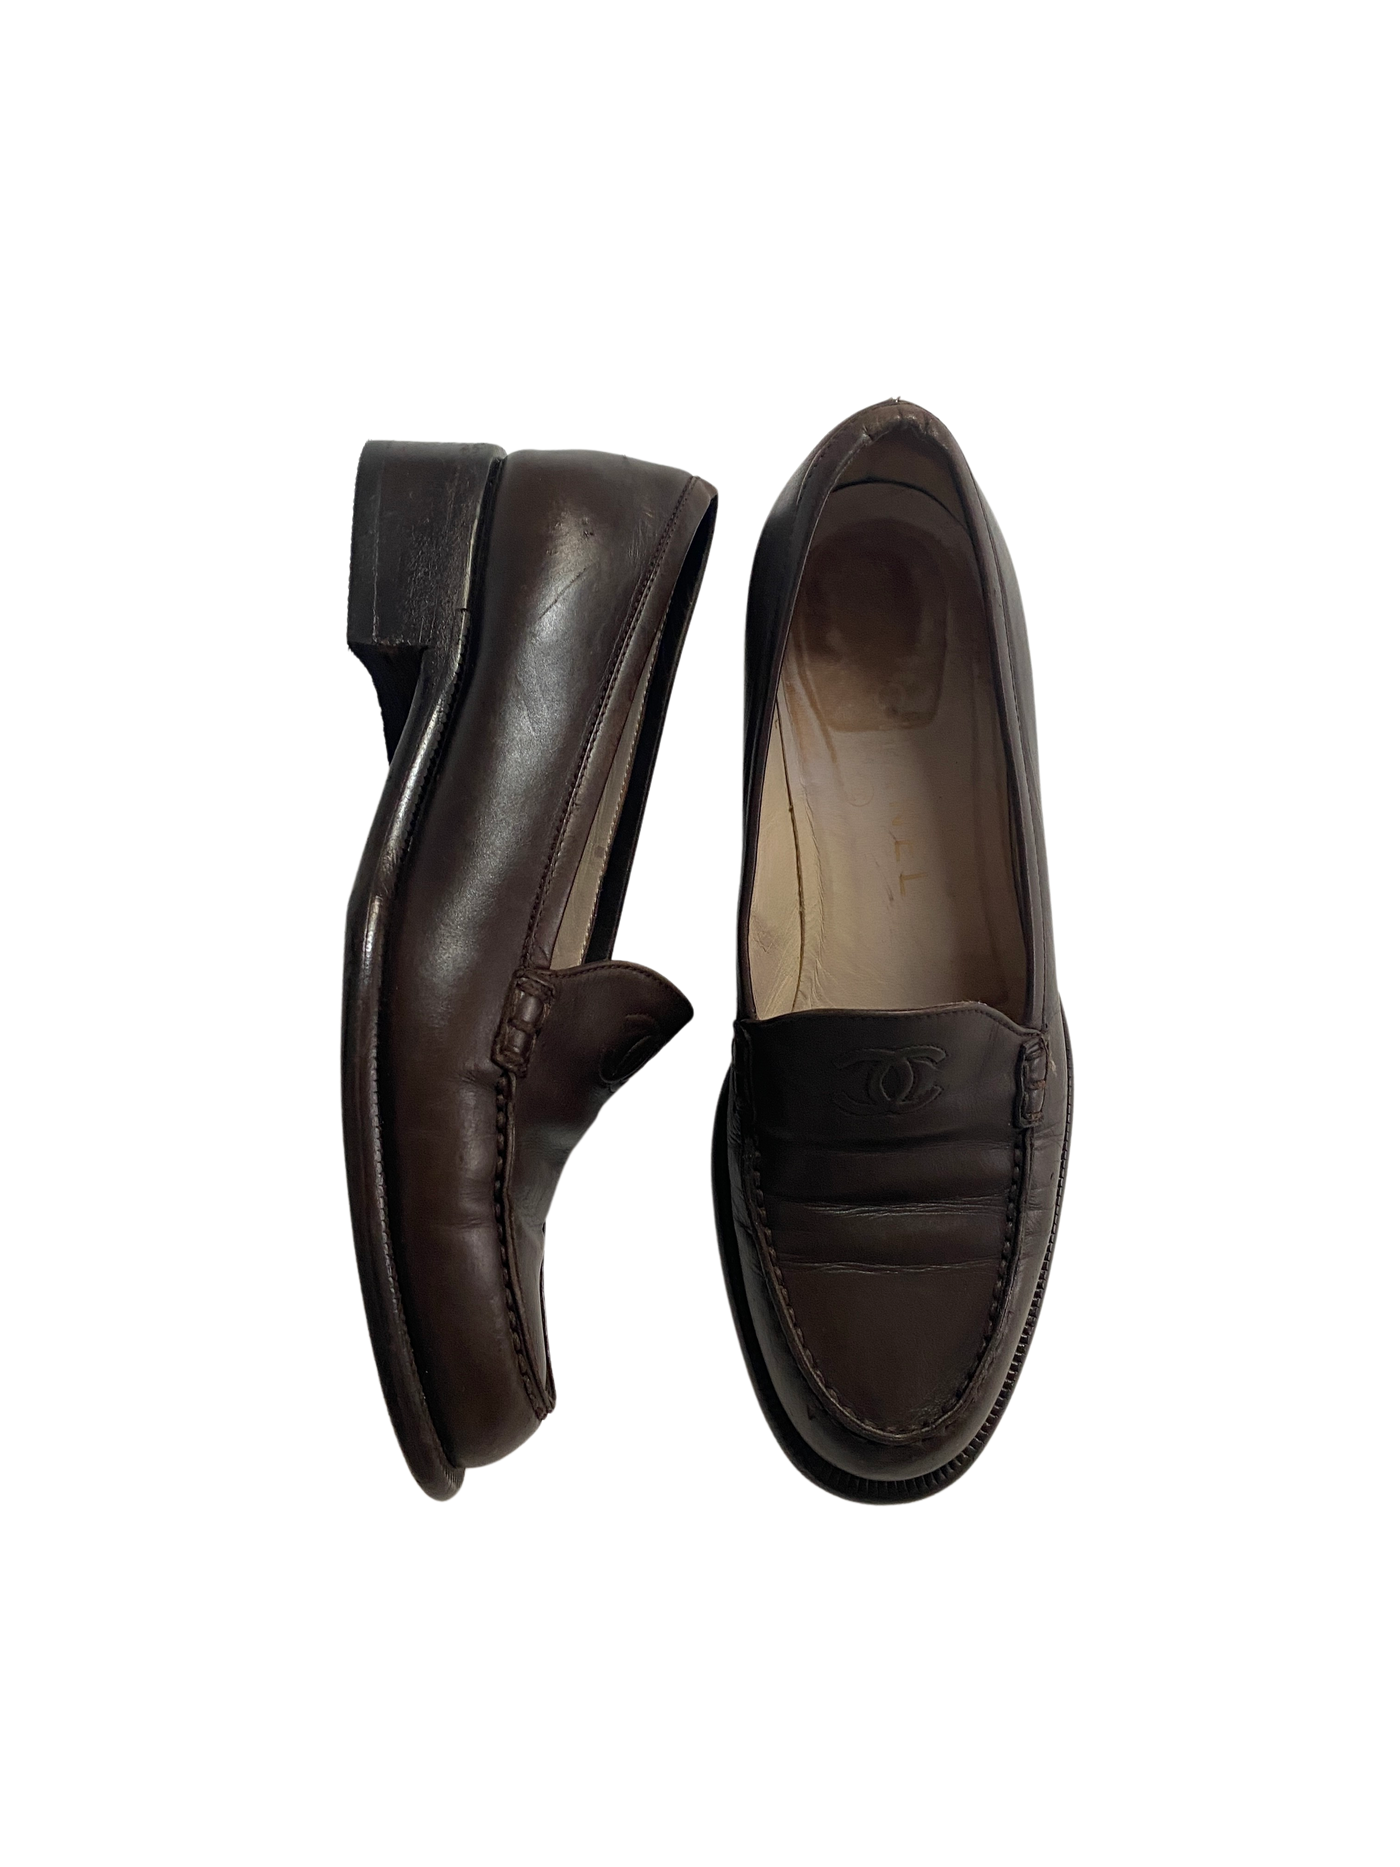 Chanel Brown Loafers, 38